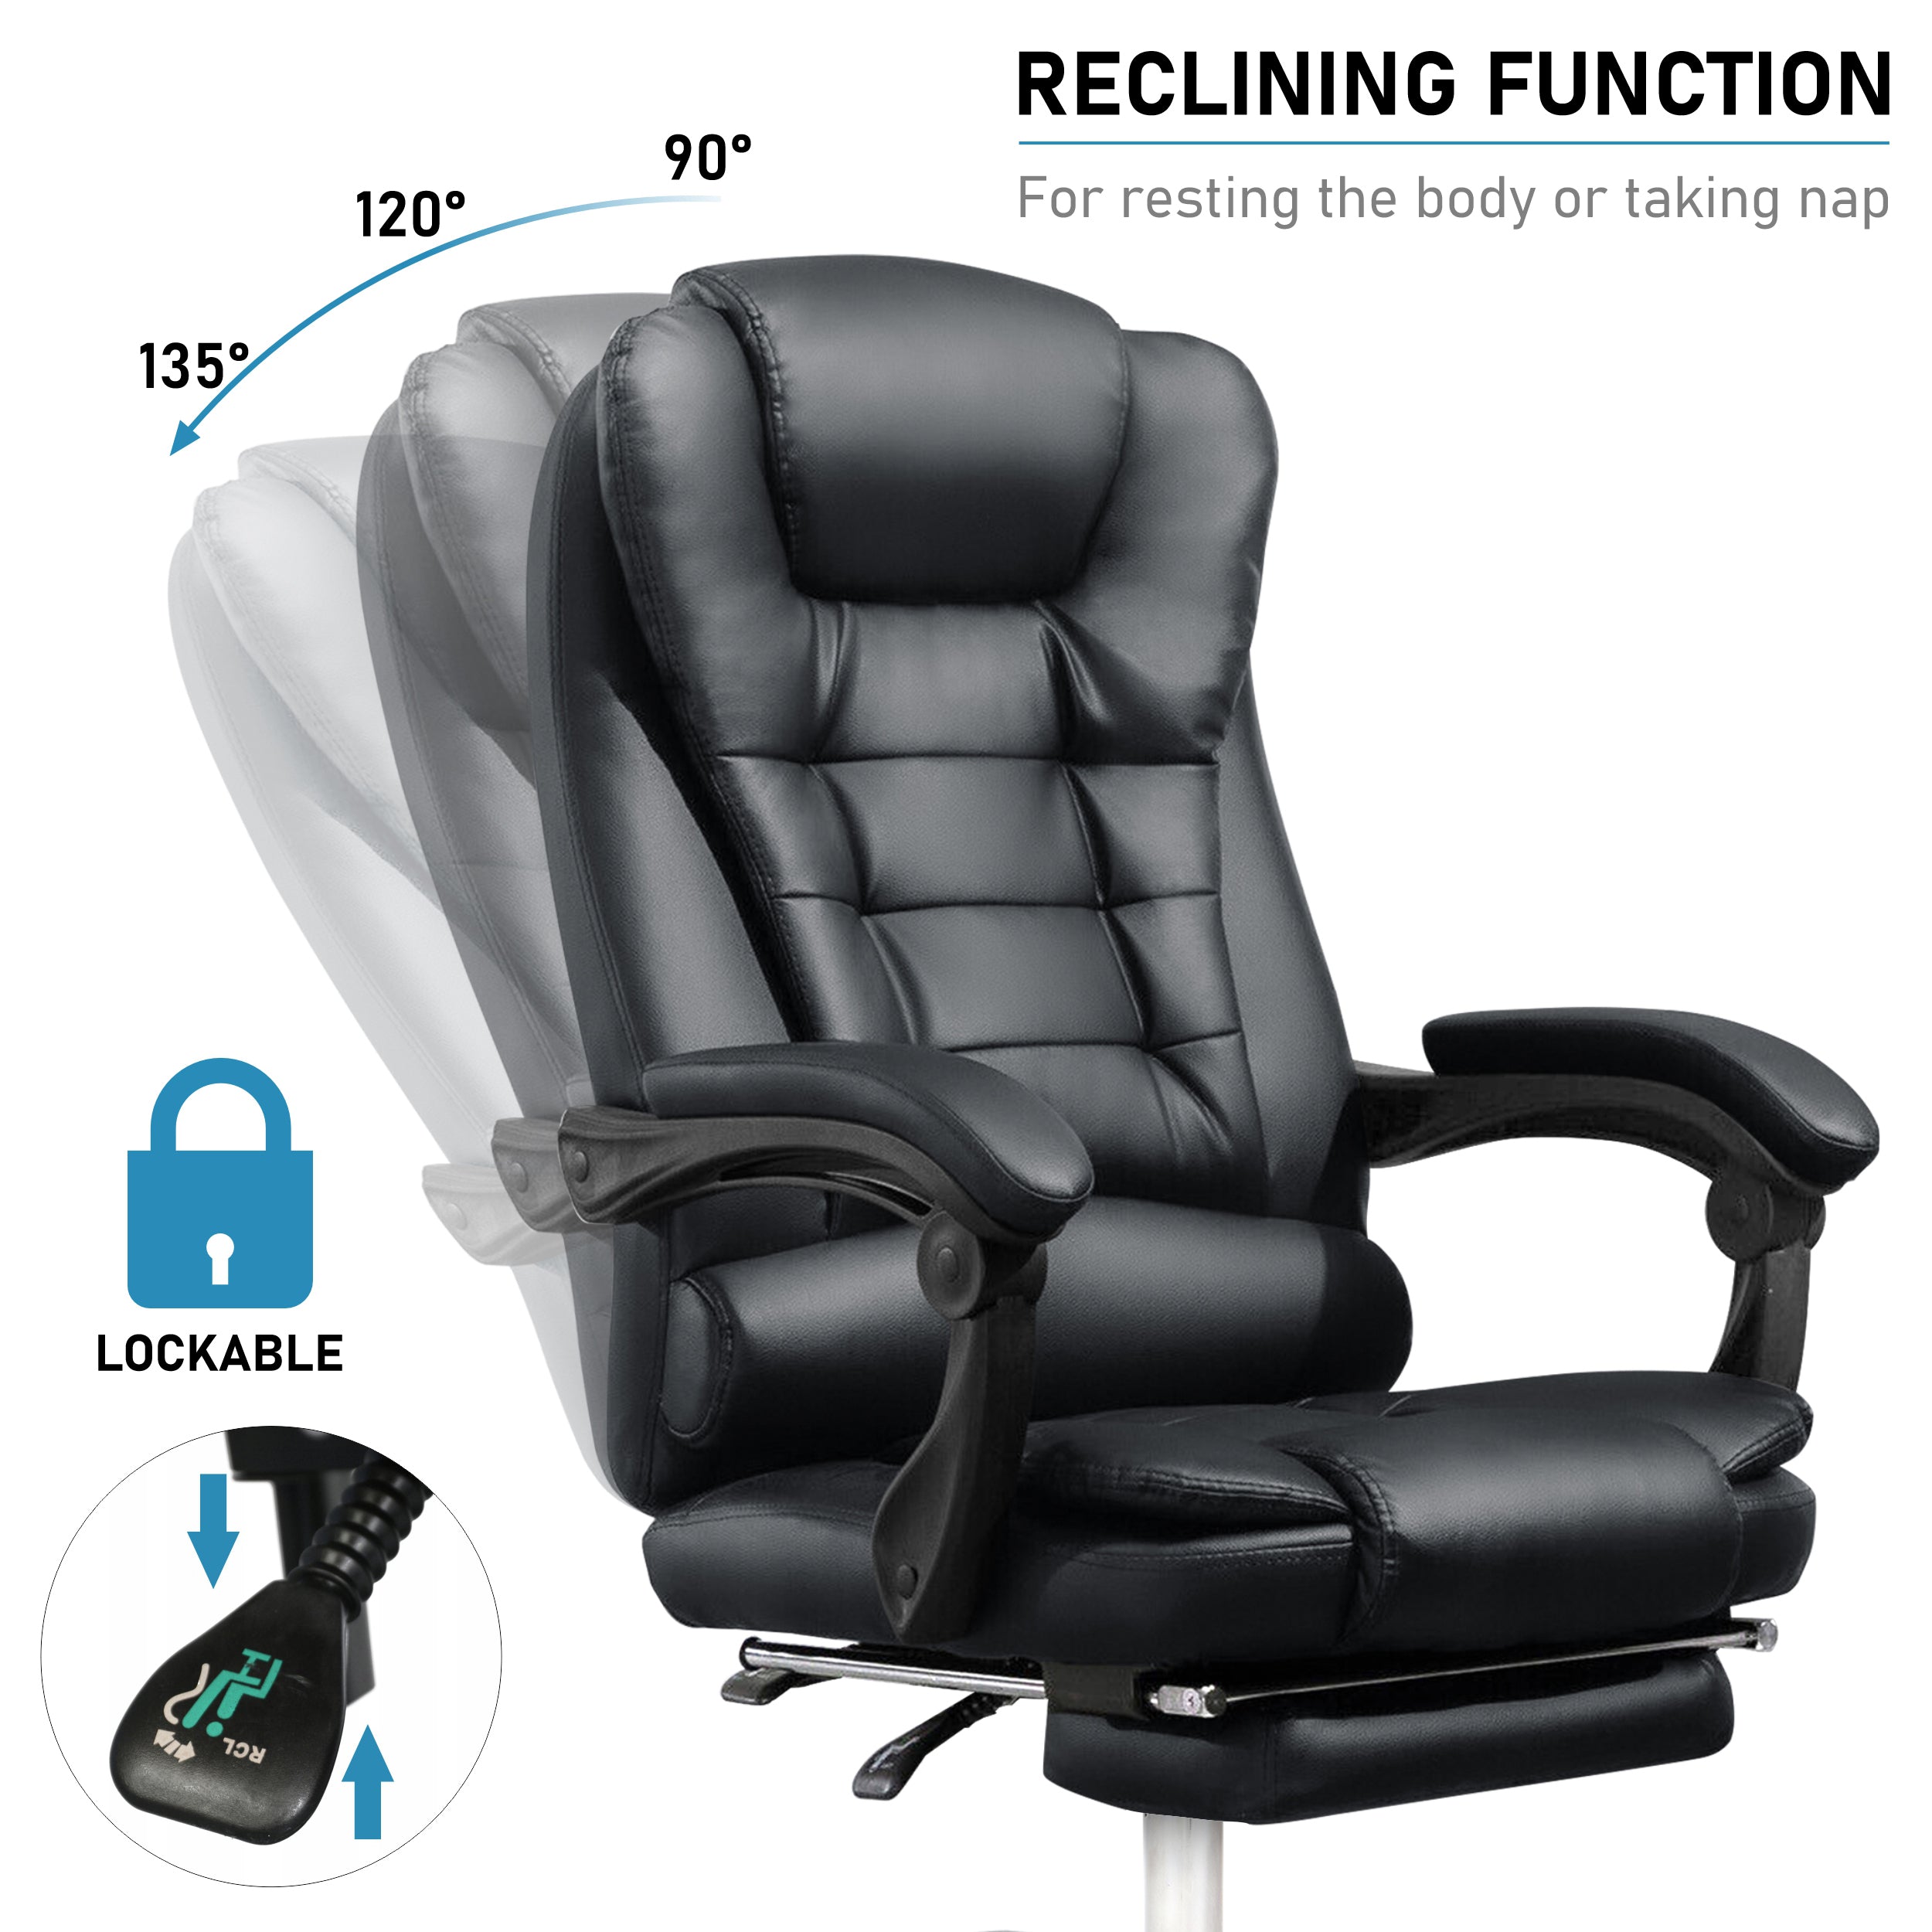 Blisswood Office Recliner Chair: Ultimate Comfort